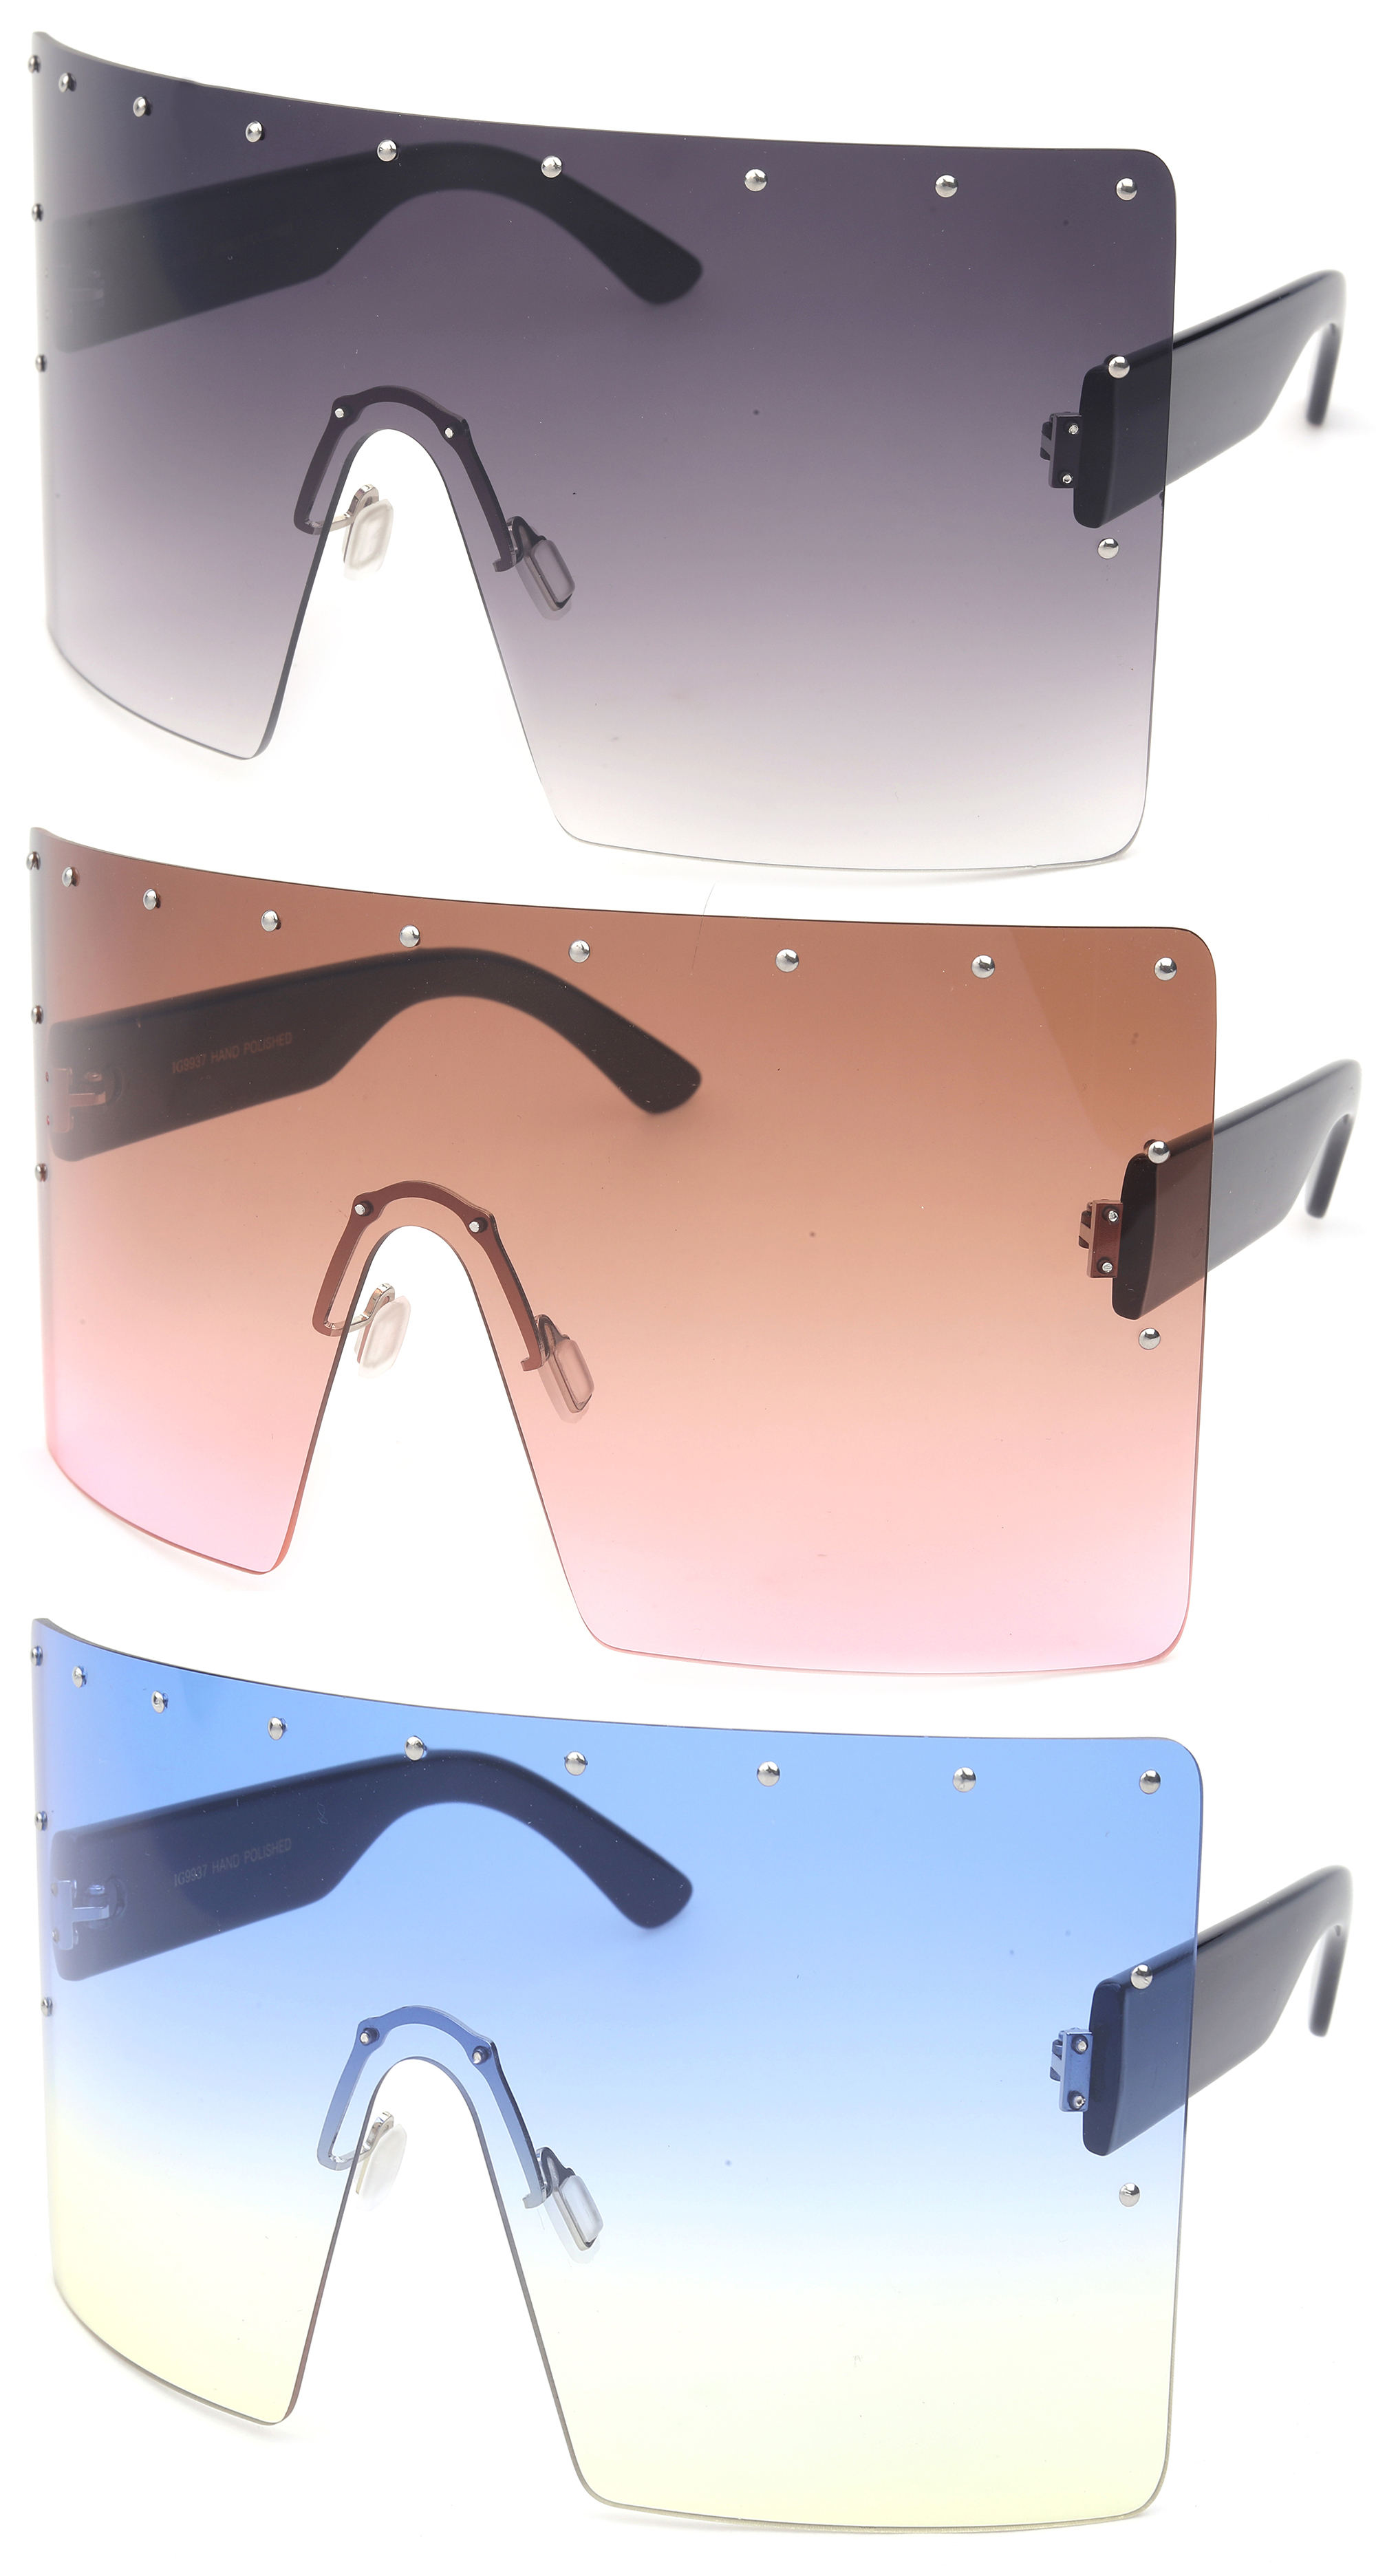 3 Pairs Newbee Fashion One Piece Lens Oversized Square Rimless Large Fashion Sunglasses for Women, 7*3.25 inches Rectangle Flat Top Face Shield, Pins Decorations, UV 400 Lens, Smoke & Pink & Blue - image 1 of 2